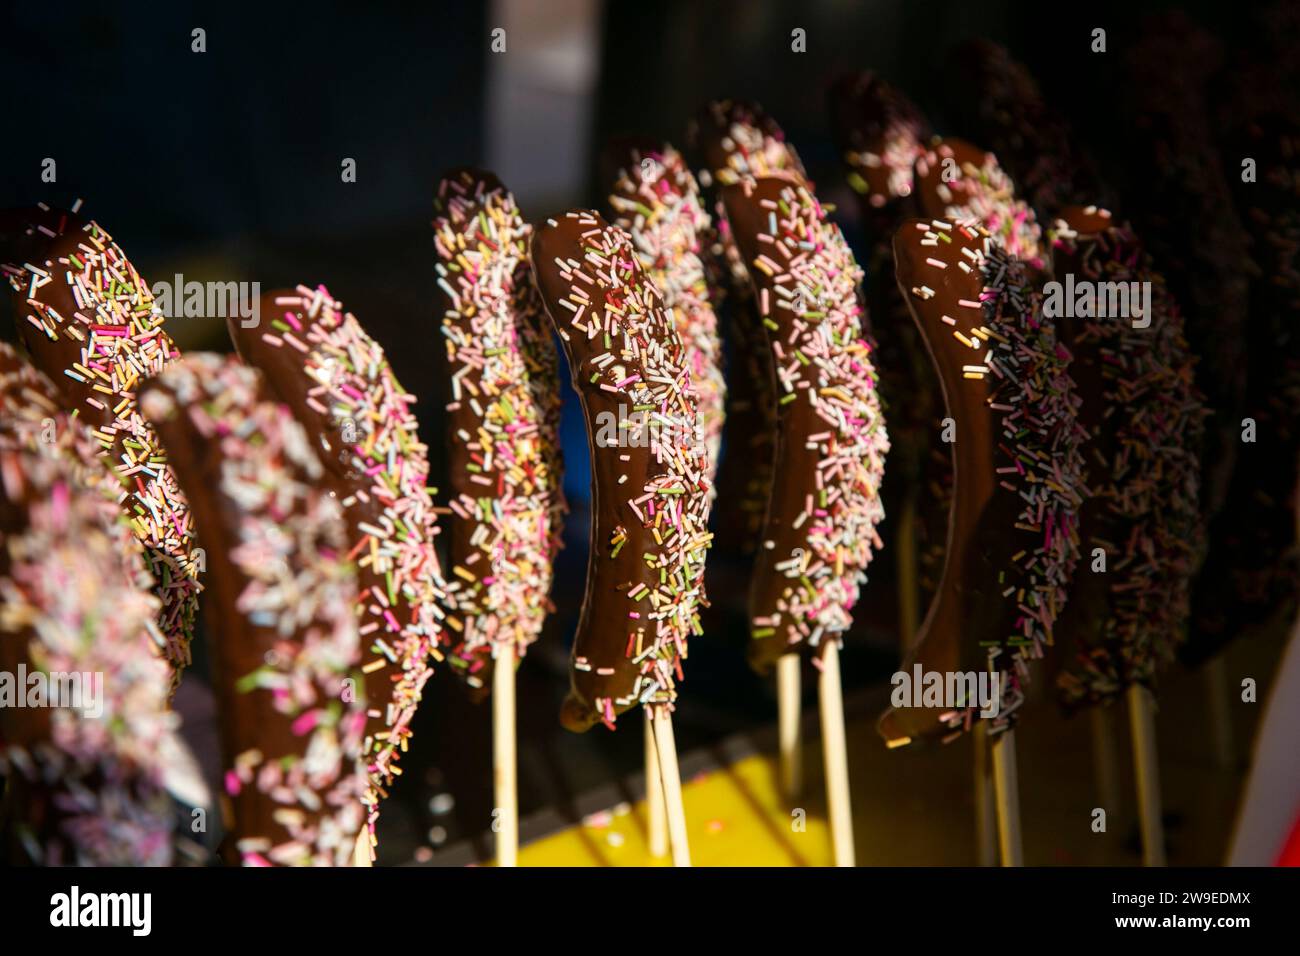 Bananas dipped in chocolate with colored candy shavings. Stock Photo